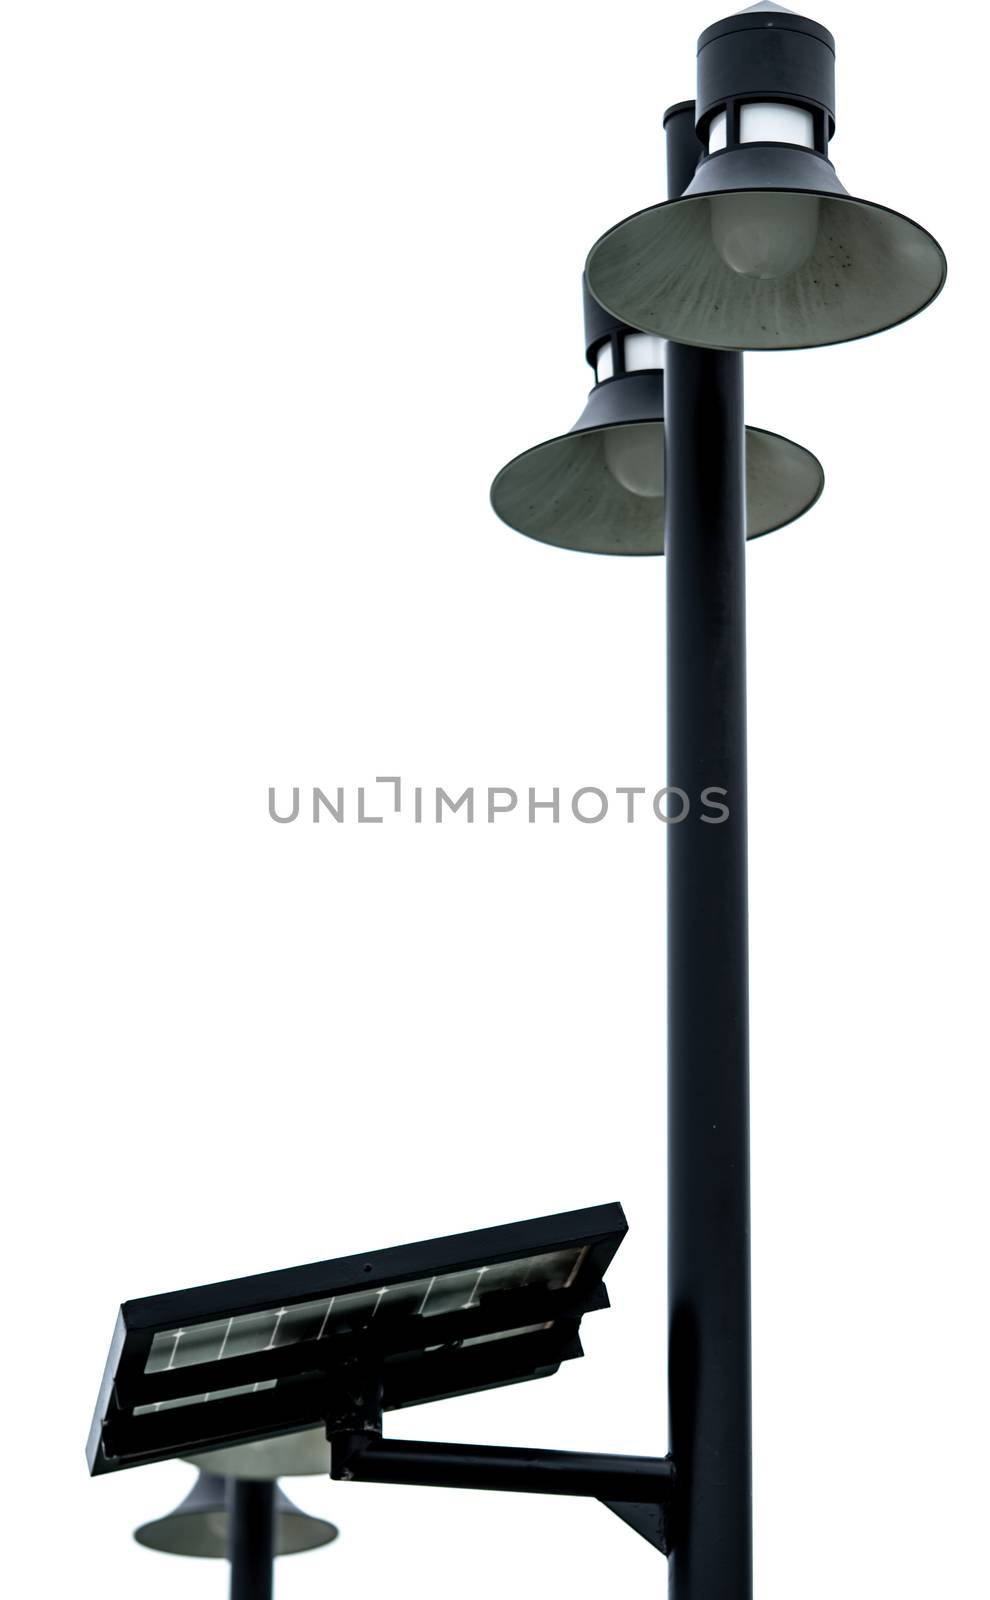 Street lamppost with solar cell panel power. Electric pole with solar energy. Green energy concept. Renewal energy in modern city. Alternative electricity source. Sustainable resources concept. by Fahroni